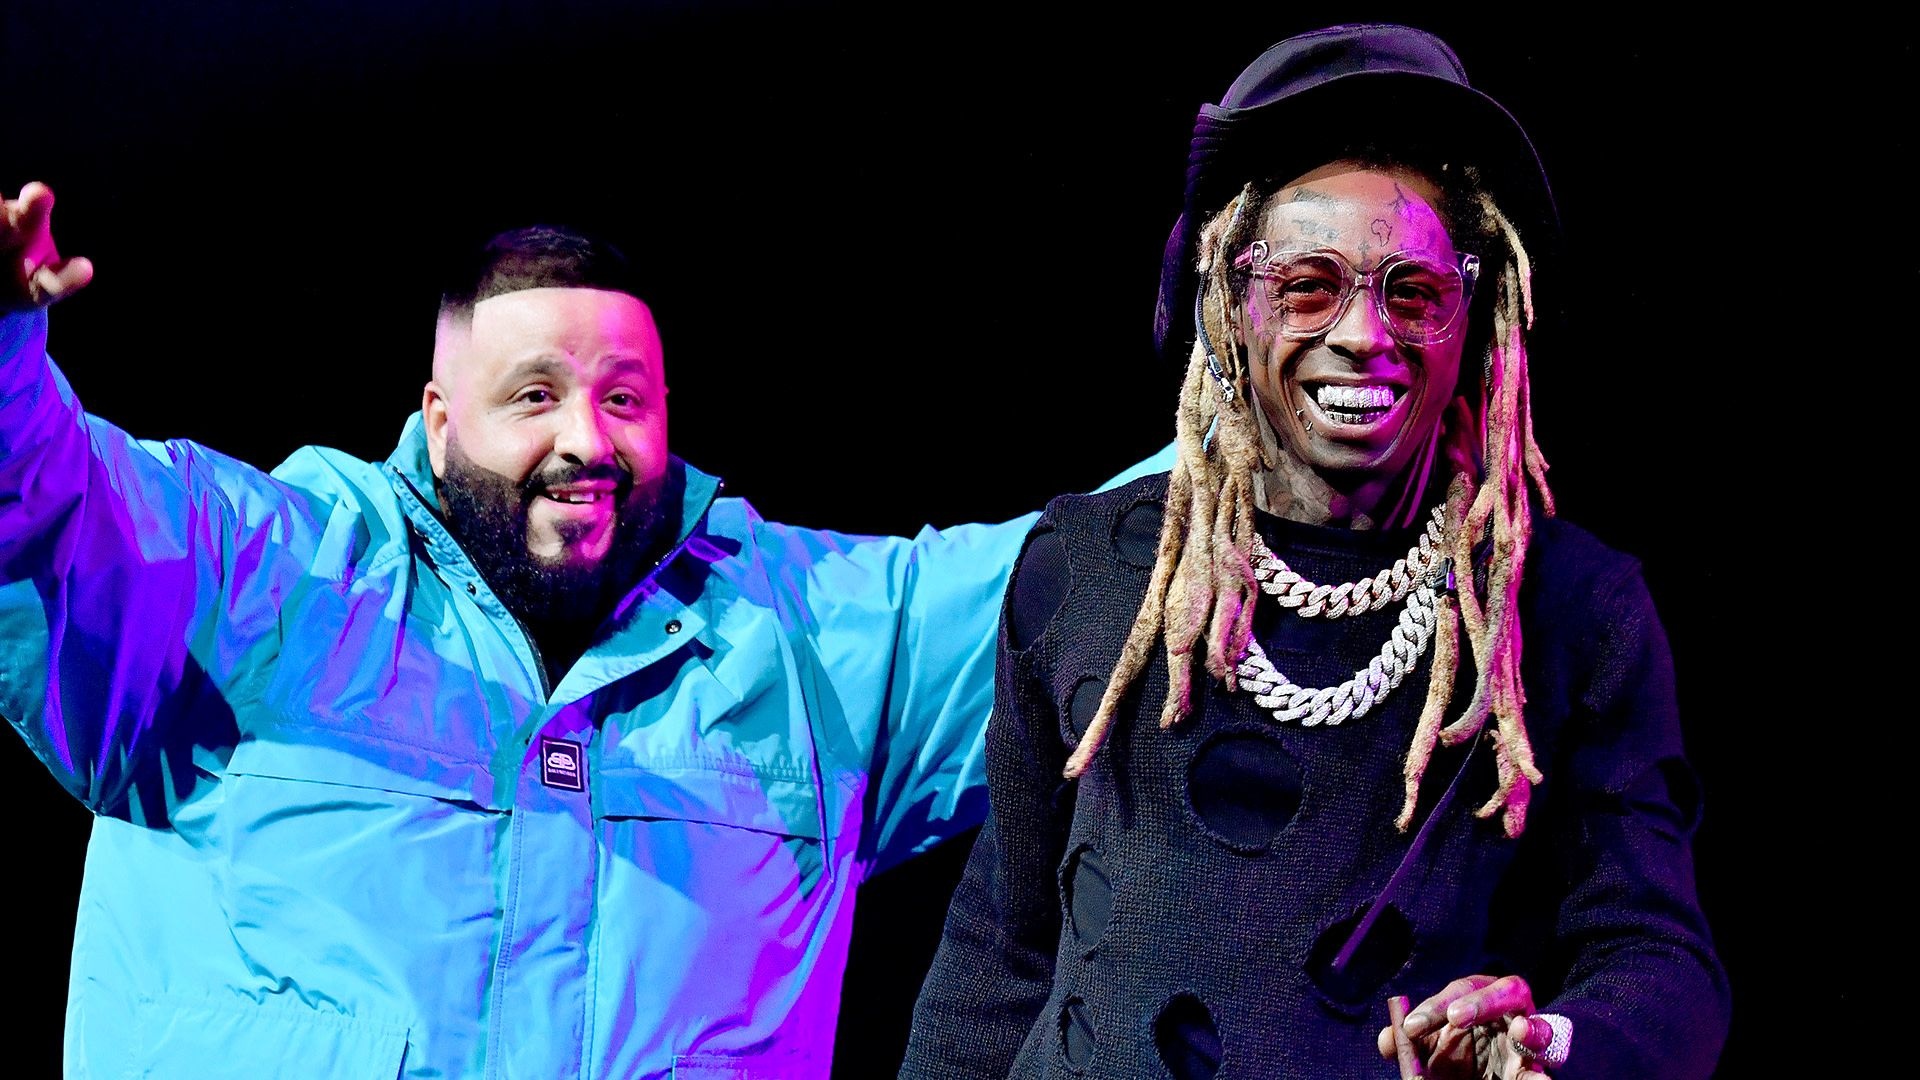 Lil Wayne, Exciting collaborations, Drake feature, Anticipated release, 1920x1080 Full HD Desktop